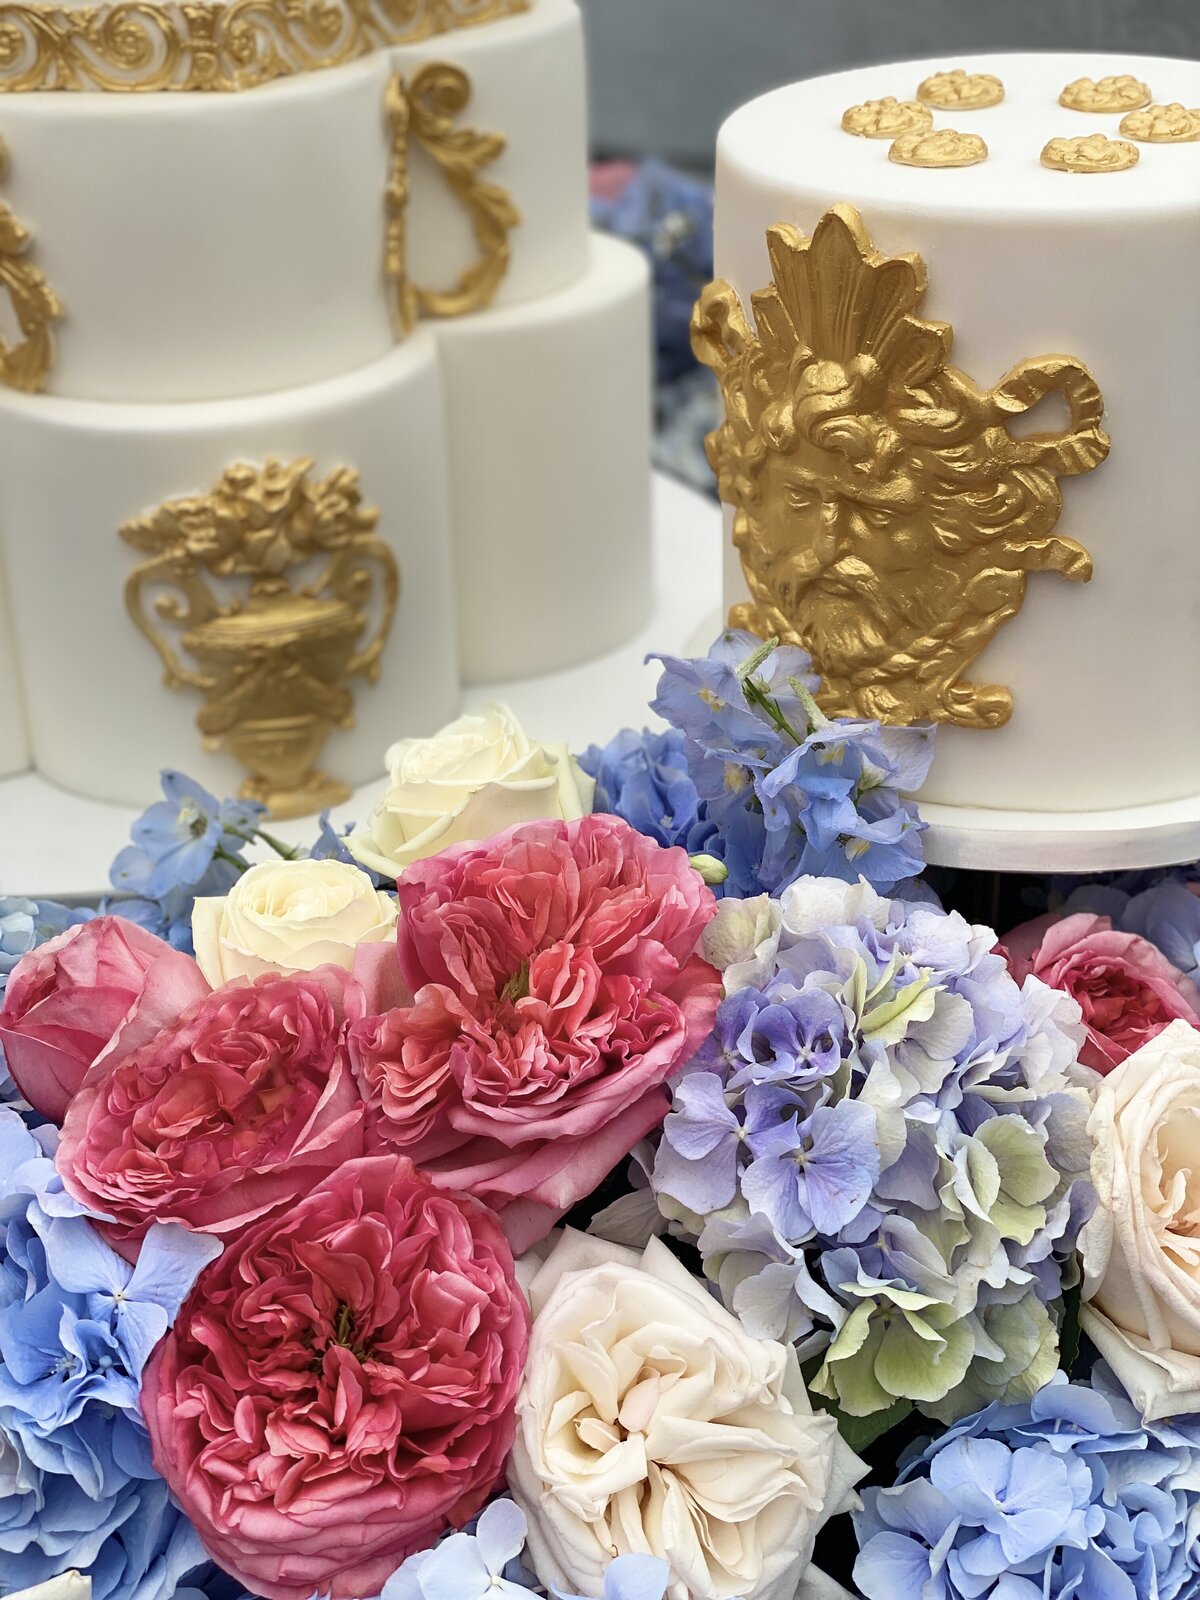 Gold and white wedding cake with fresh flowers